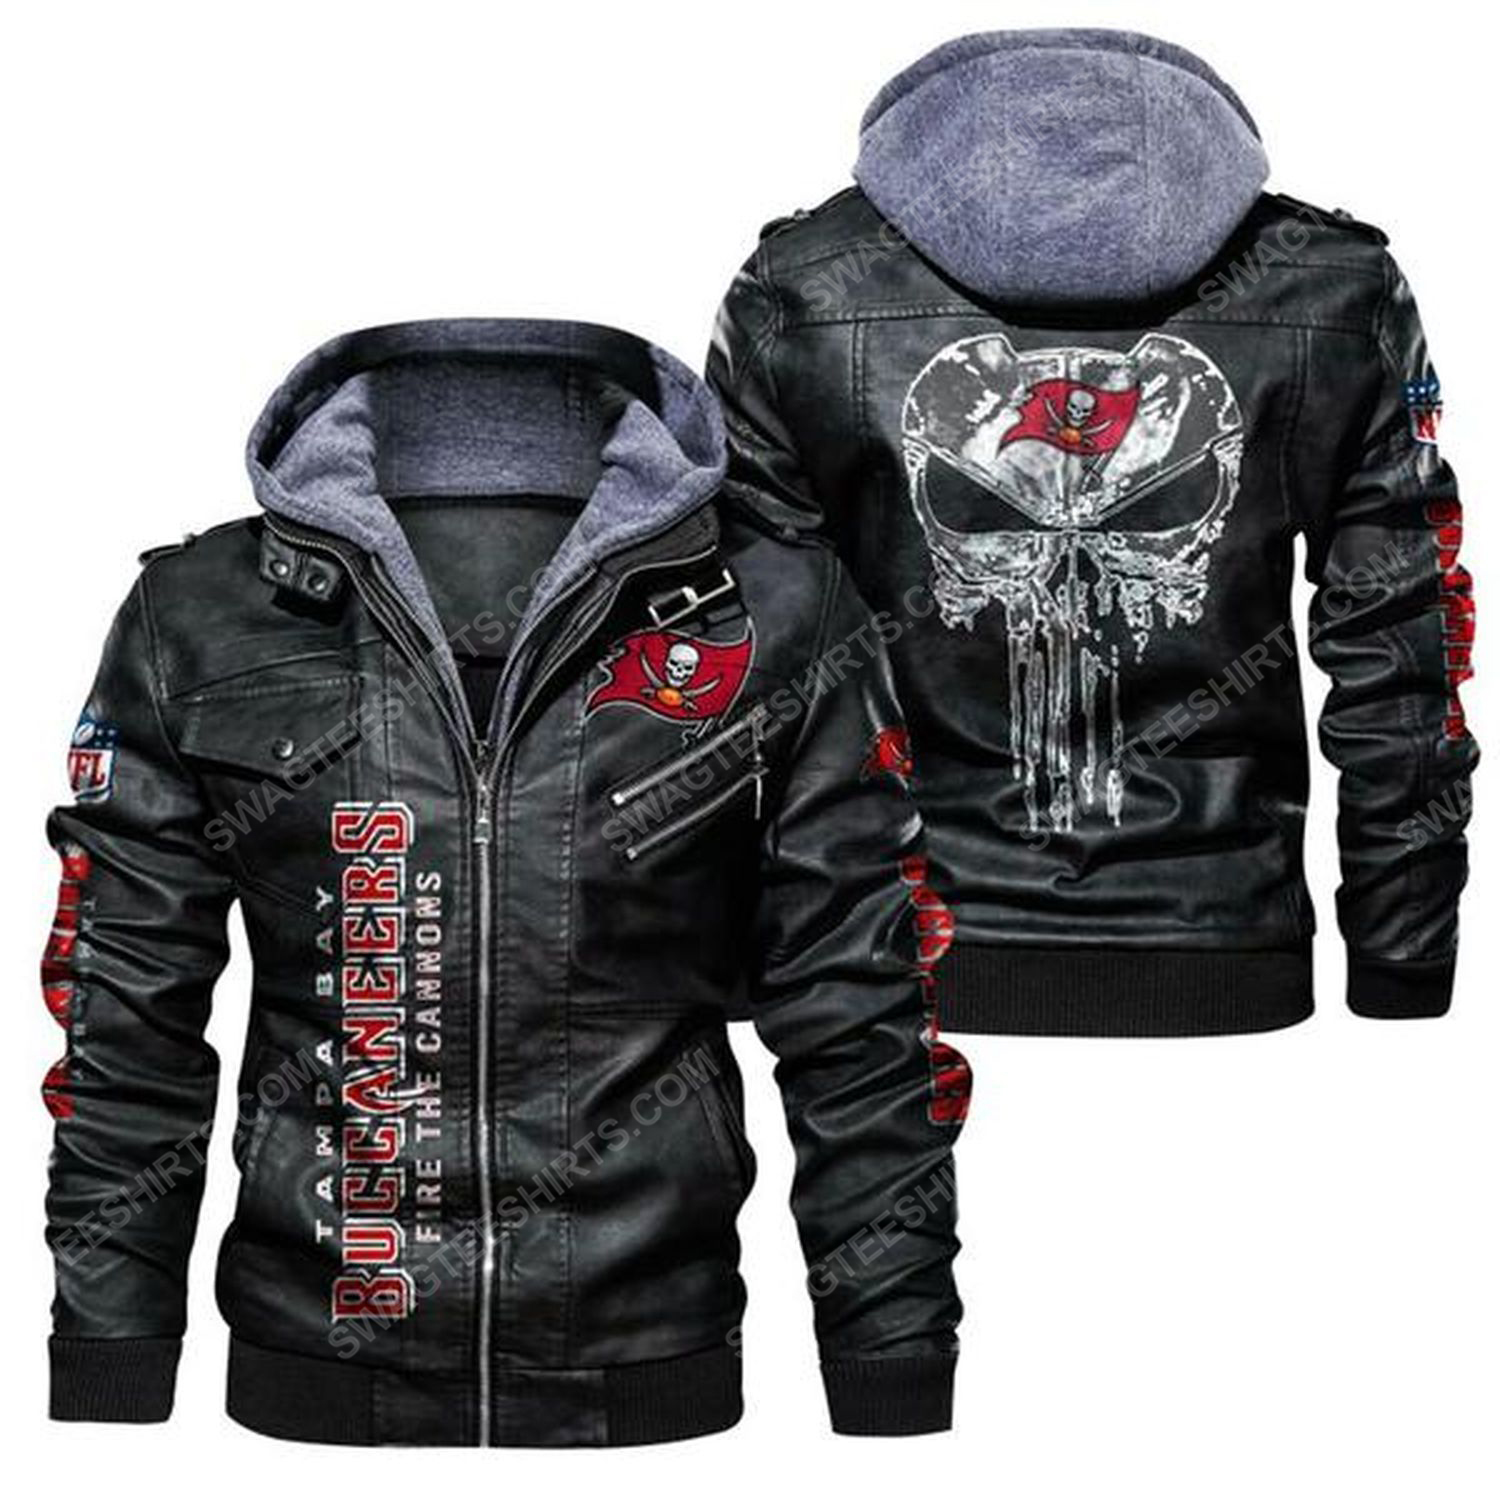 National football league tampa bay buccaneers leather jacket